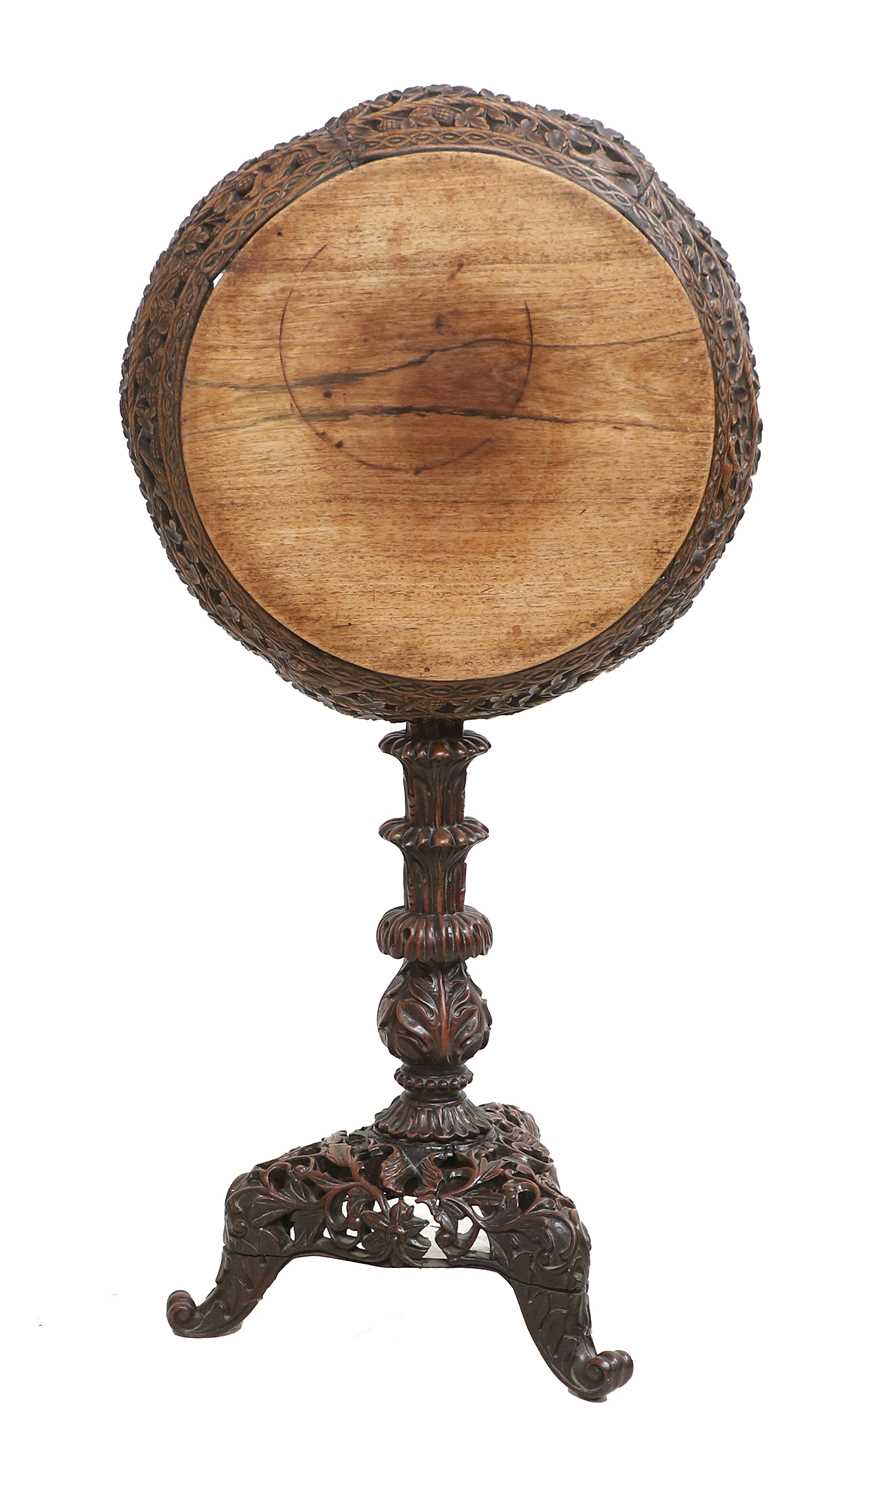 A Late 19th/Early 20th Century Anglo-Indian Carved Bombay Wood Tripod Table, the circular top